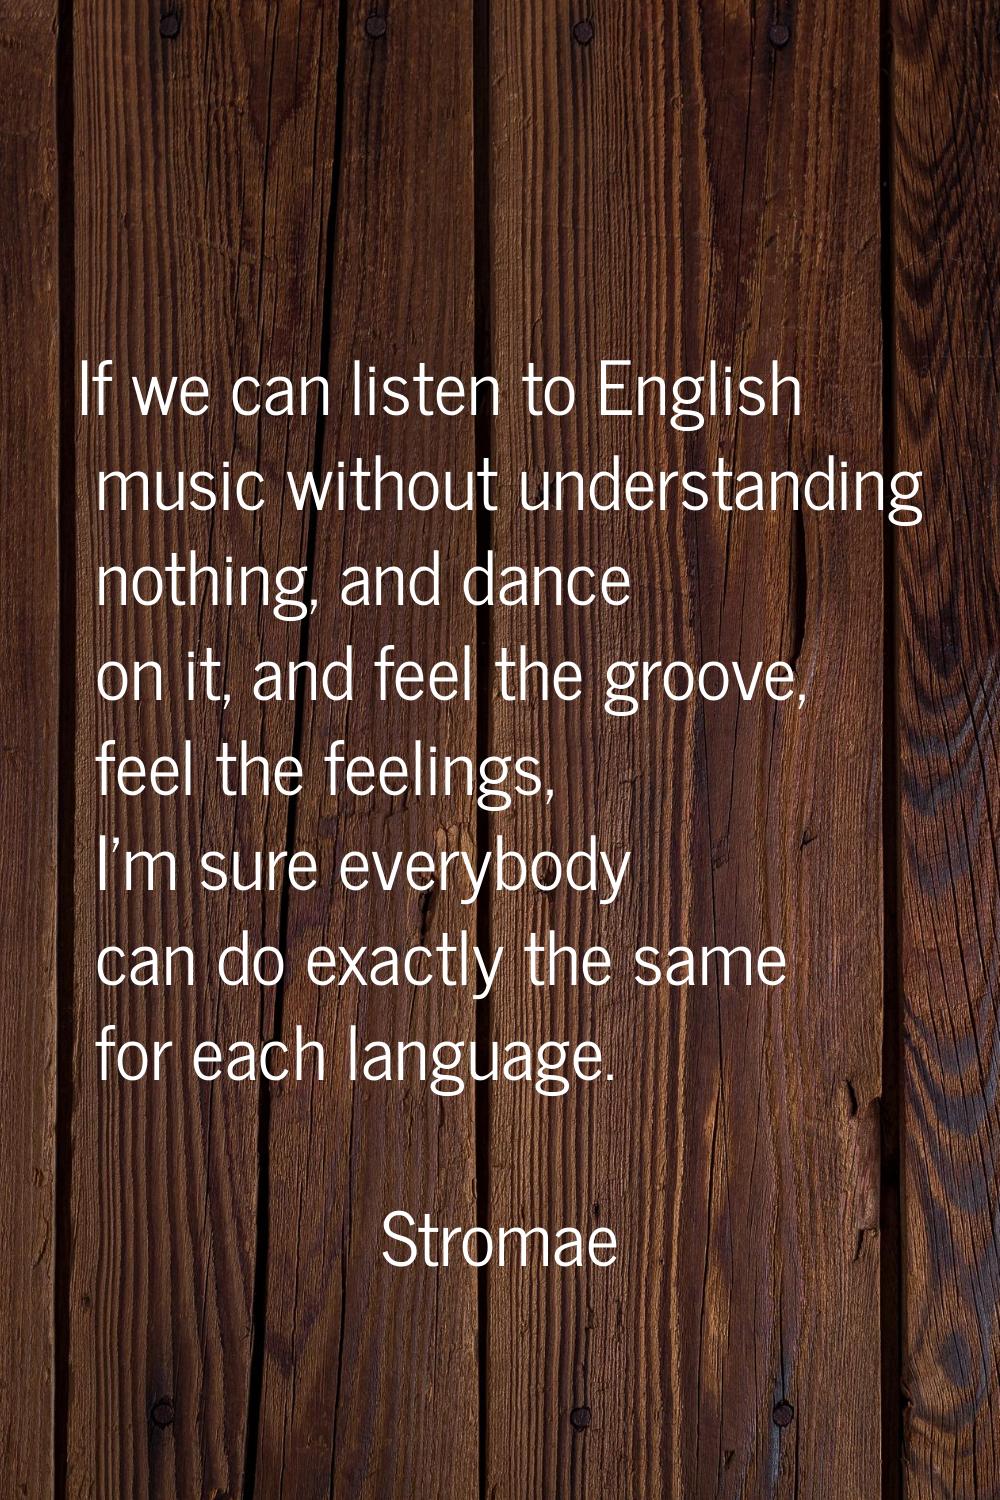 If we can listen to English music without understanding nothing, and dance on it, and feel the groo